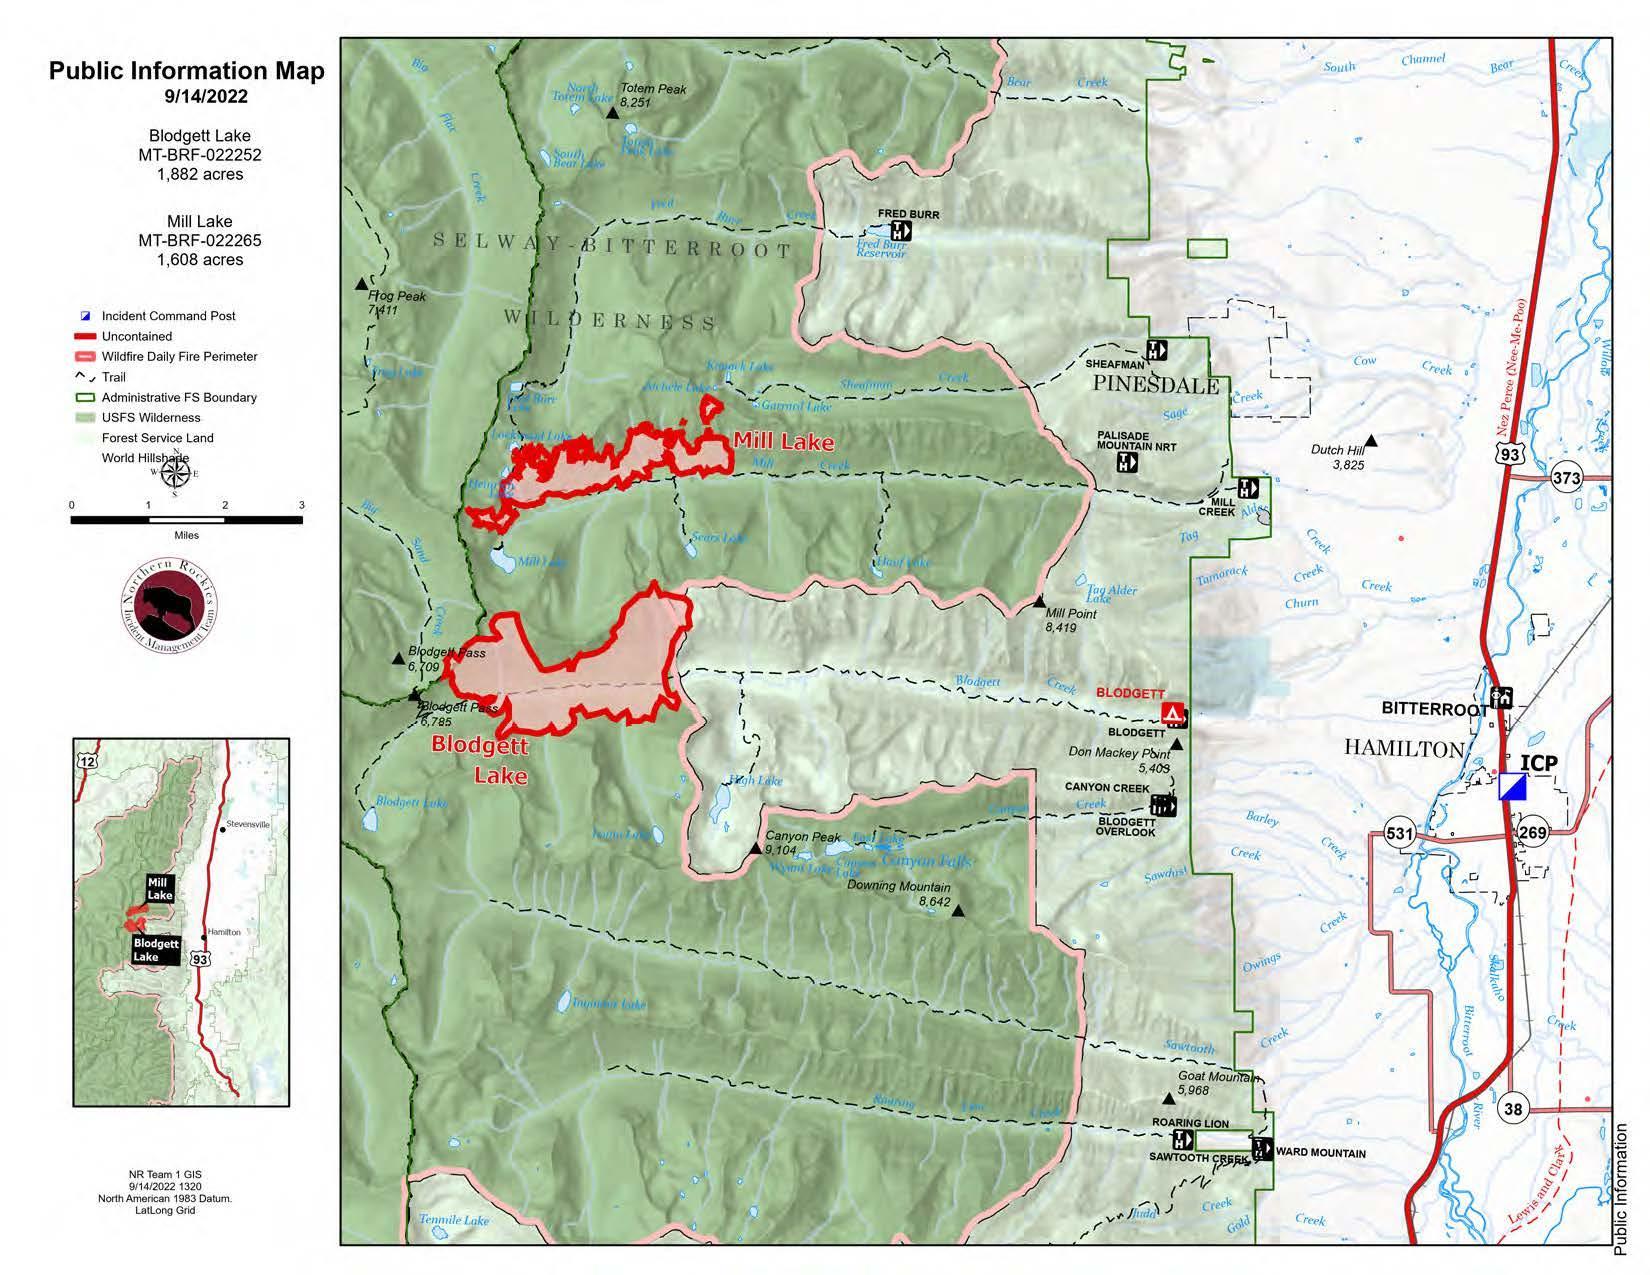 Blodgett and Mill Lake Map Sept 14, 2022